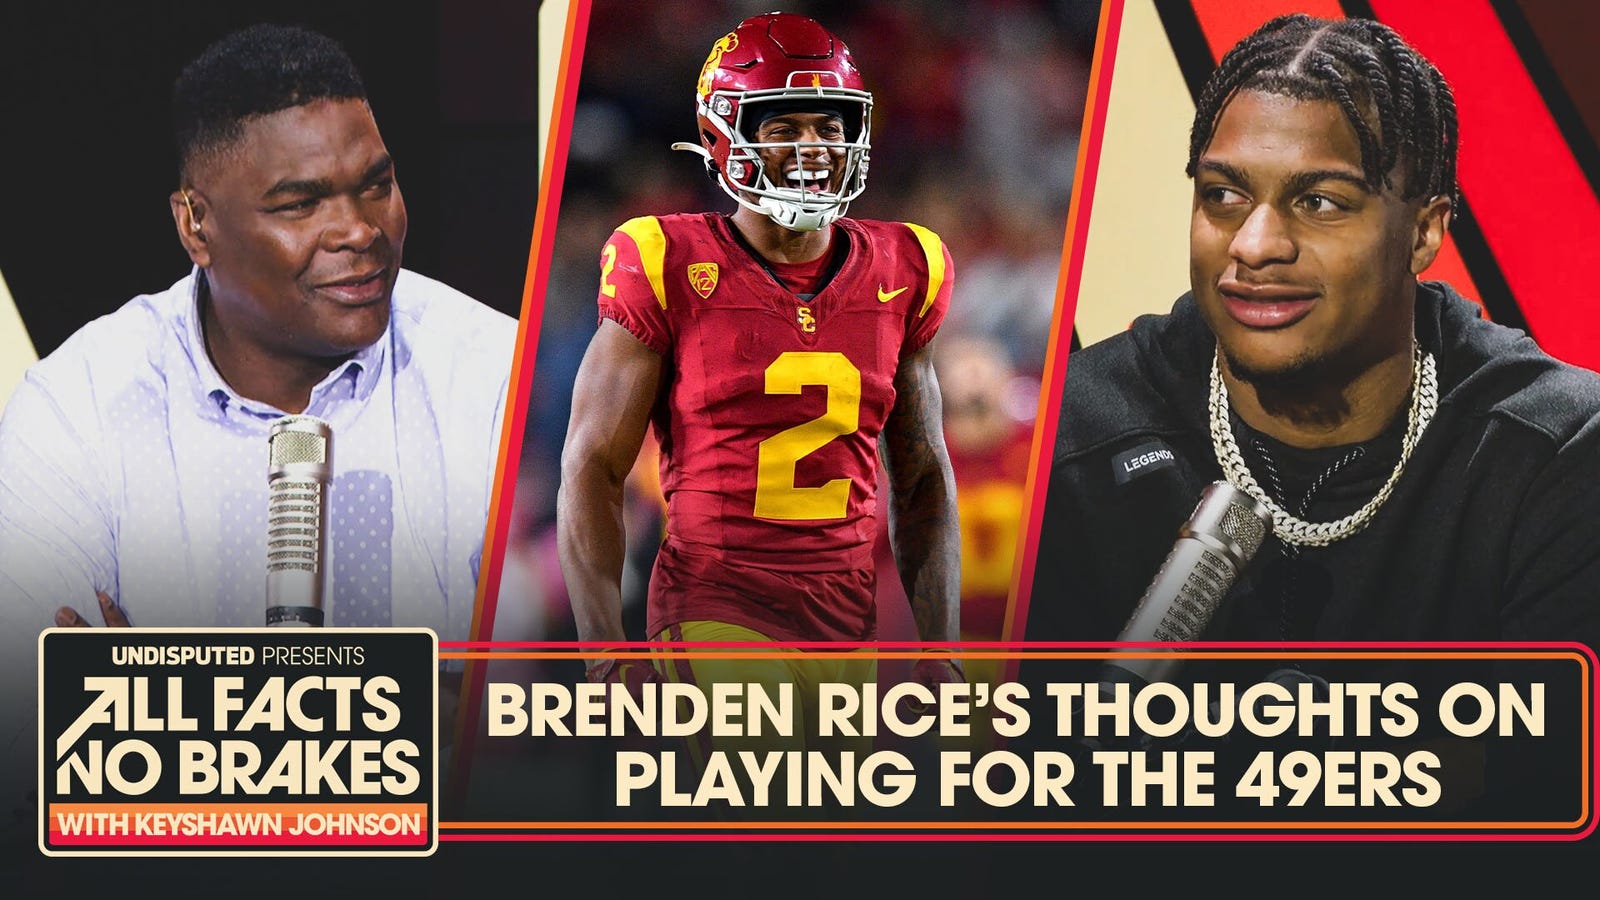 Brenden Rice on his father’s legacy, potentially playing for the 49ers